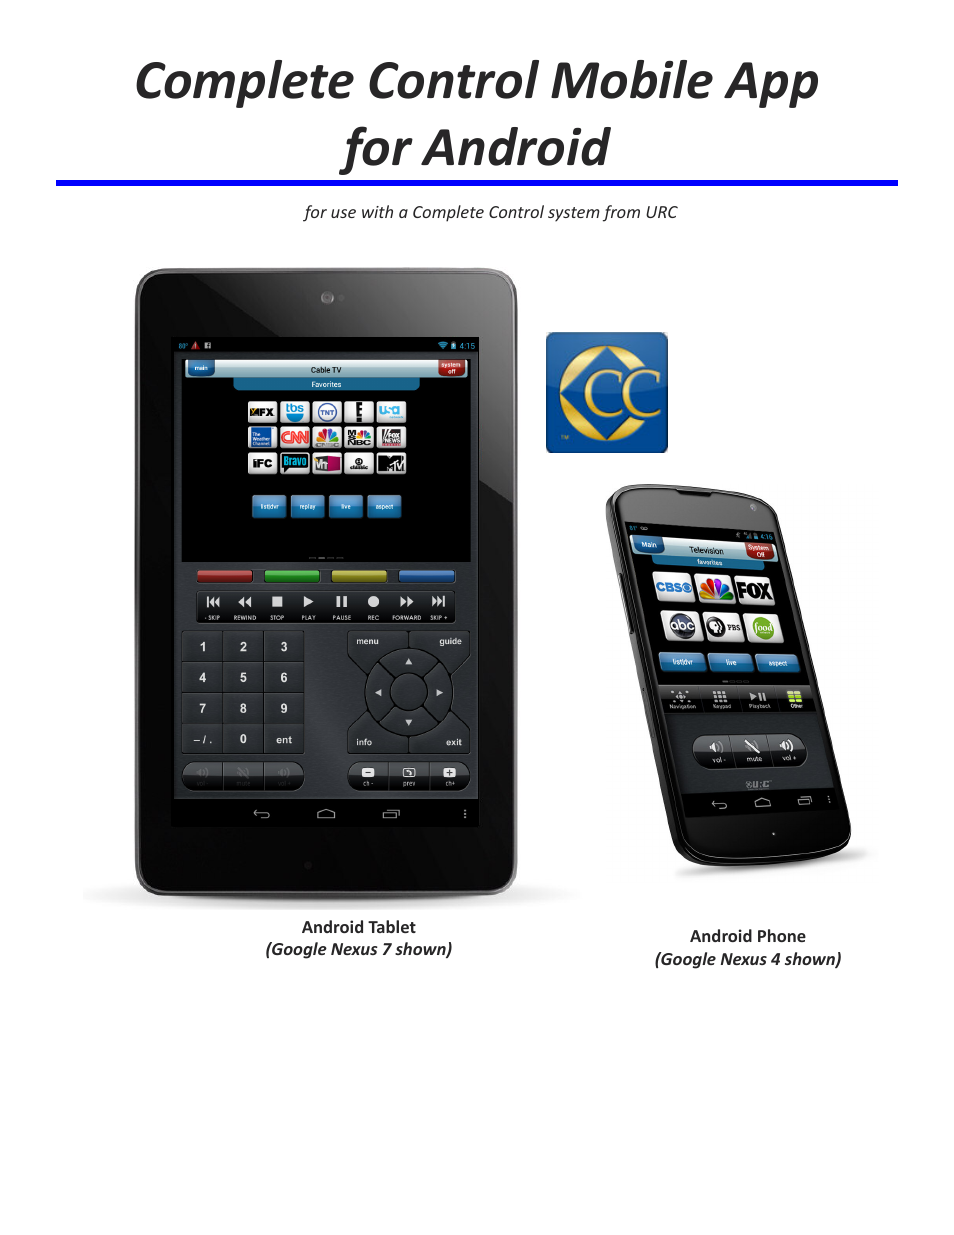 Complete Control Mobile App for Android